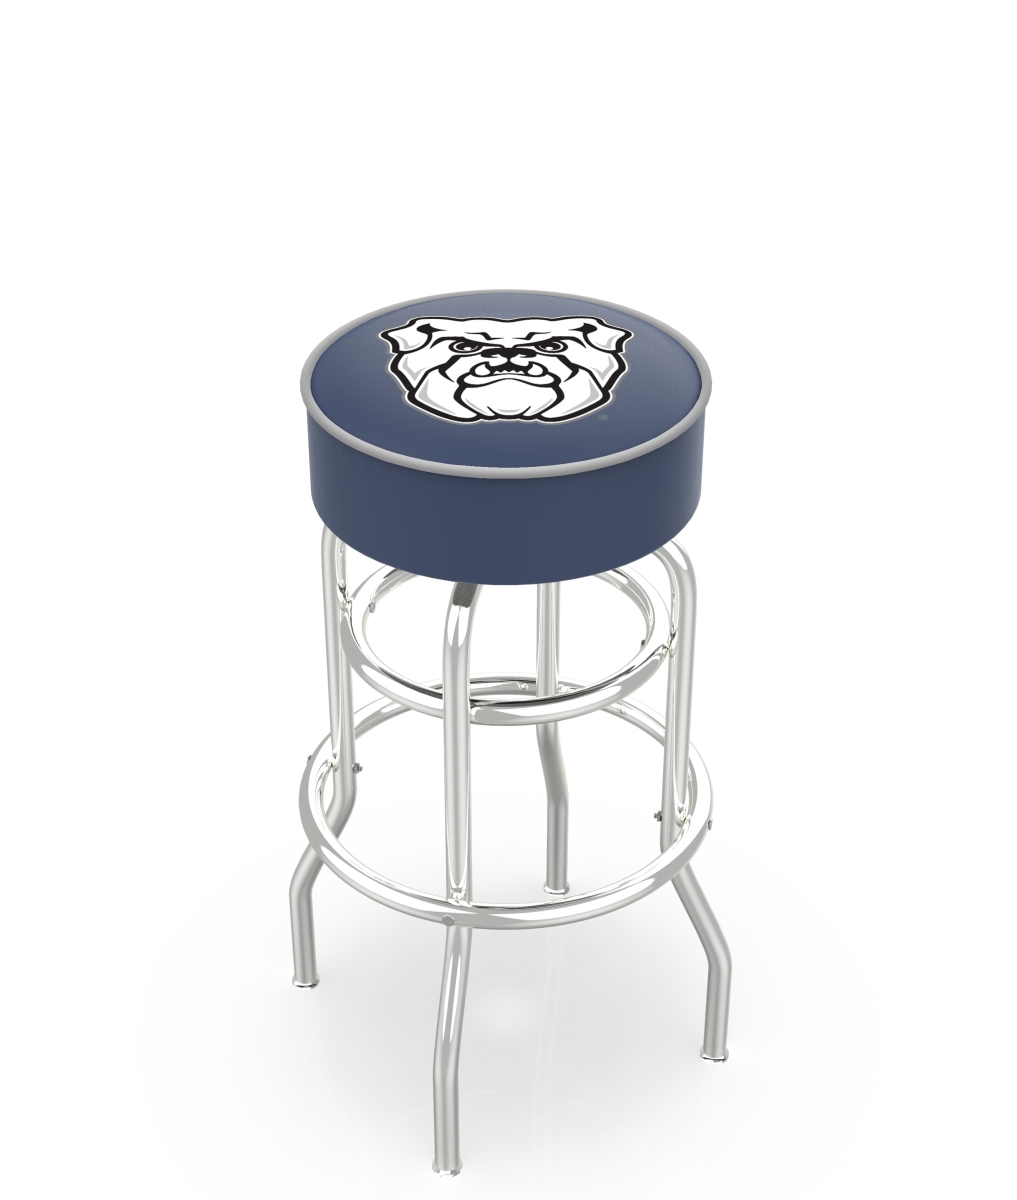 Holland Bar Stool L7C130Butler 30 in. L7C1 - 4 in. Butler Cushion Seat with Double-Ring Chrome Base Swivel Bar Stool